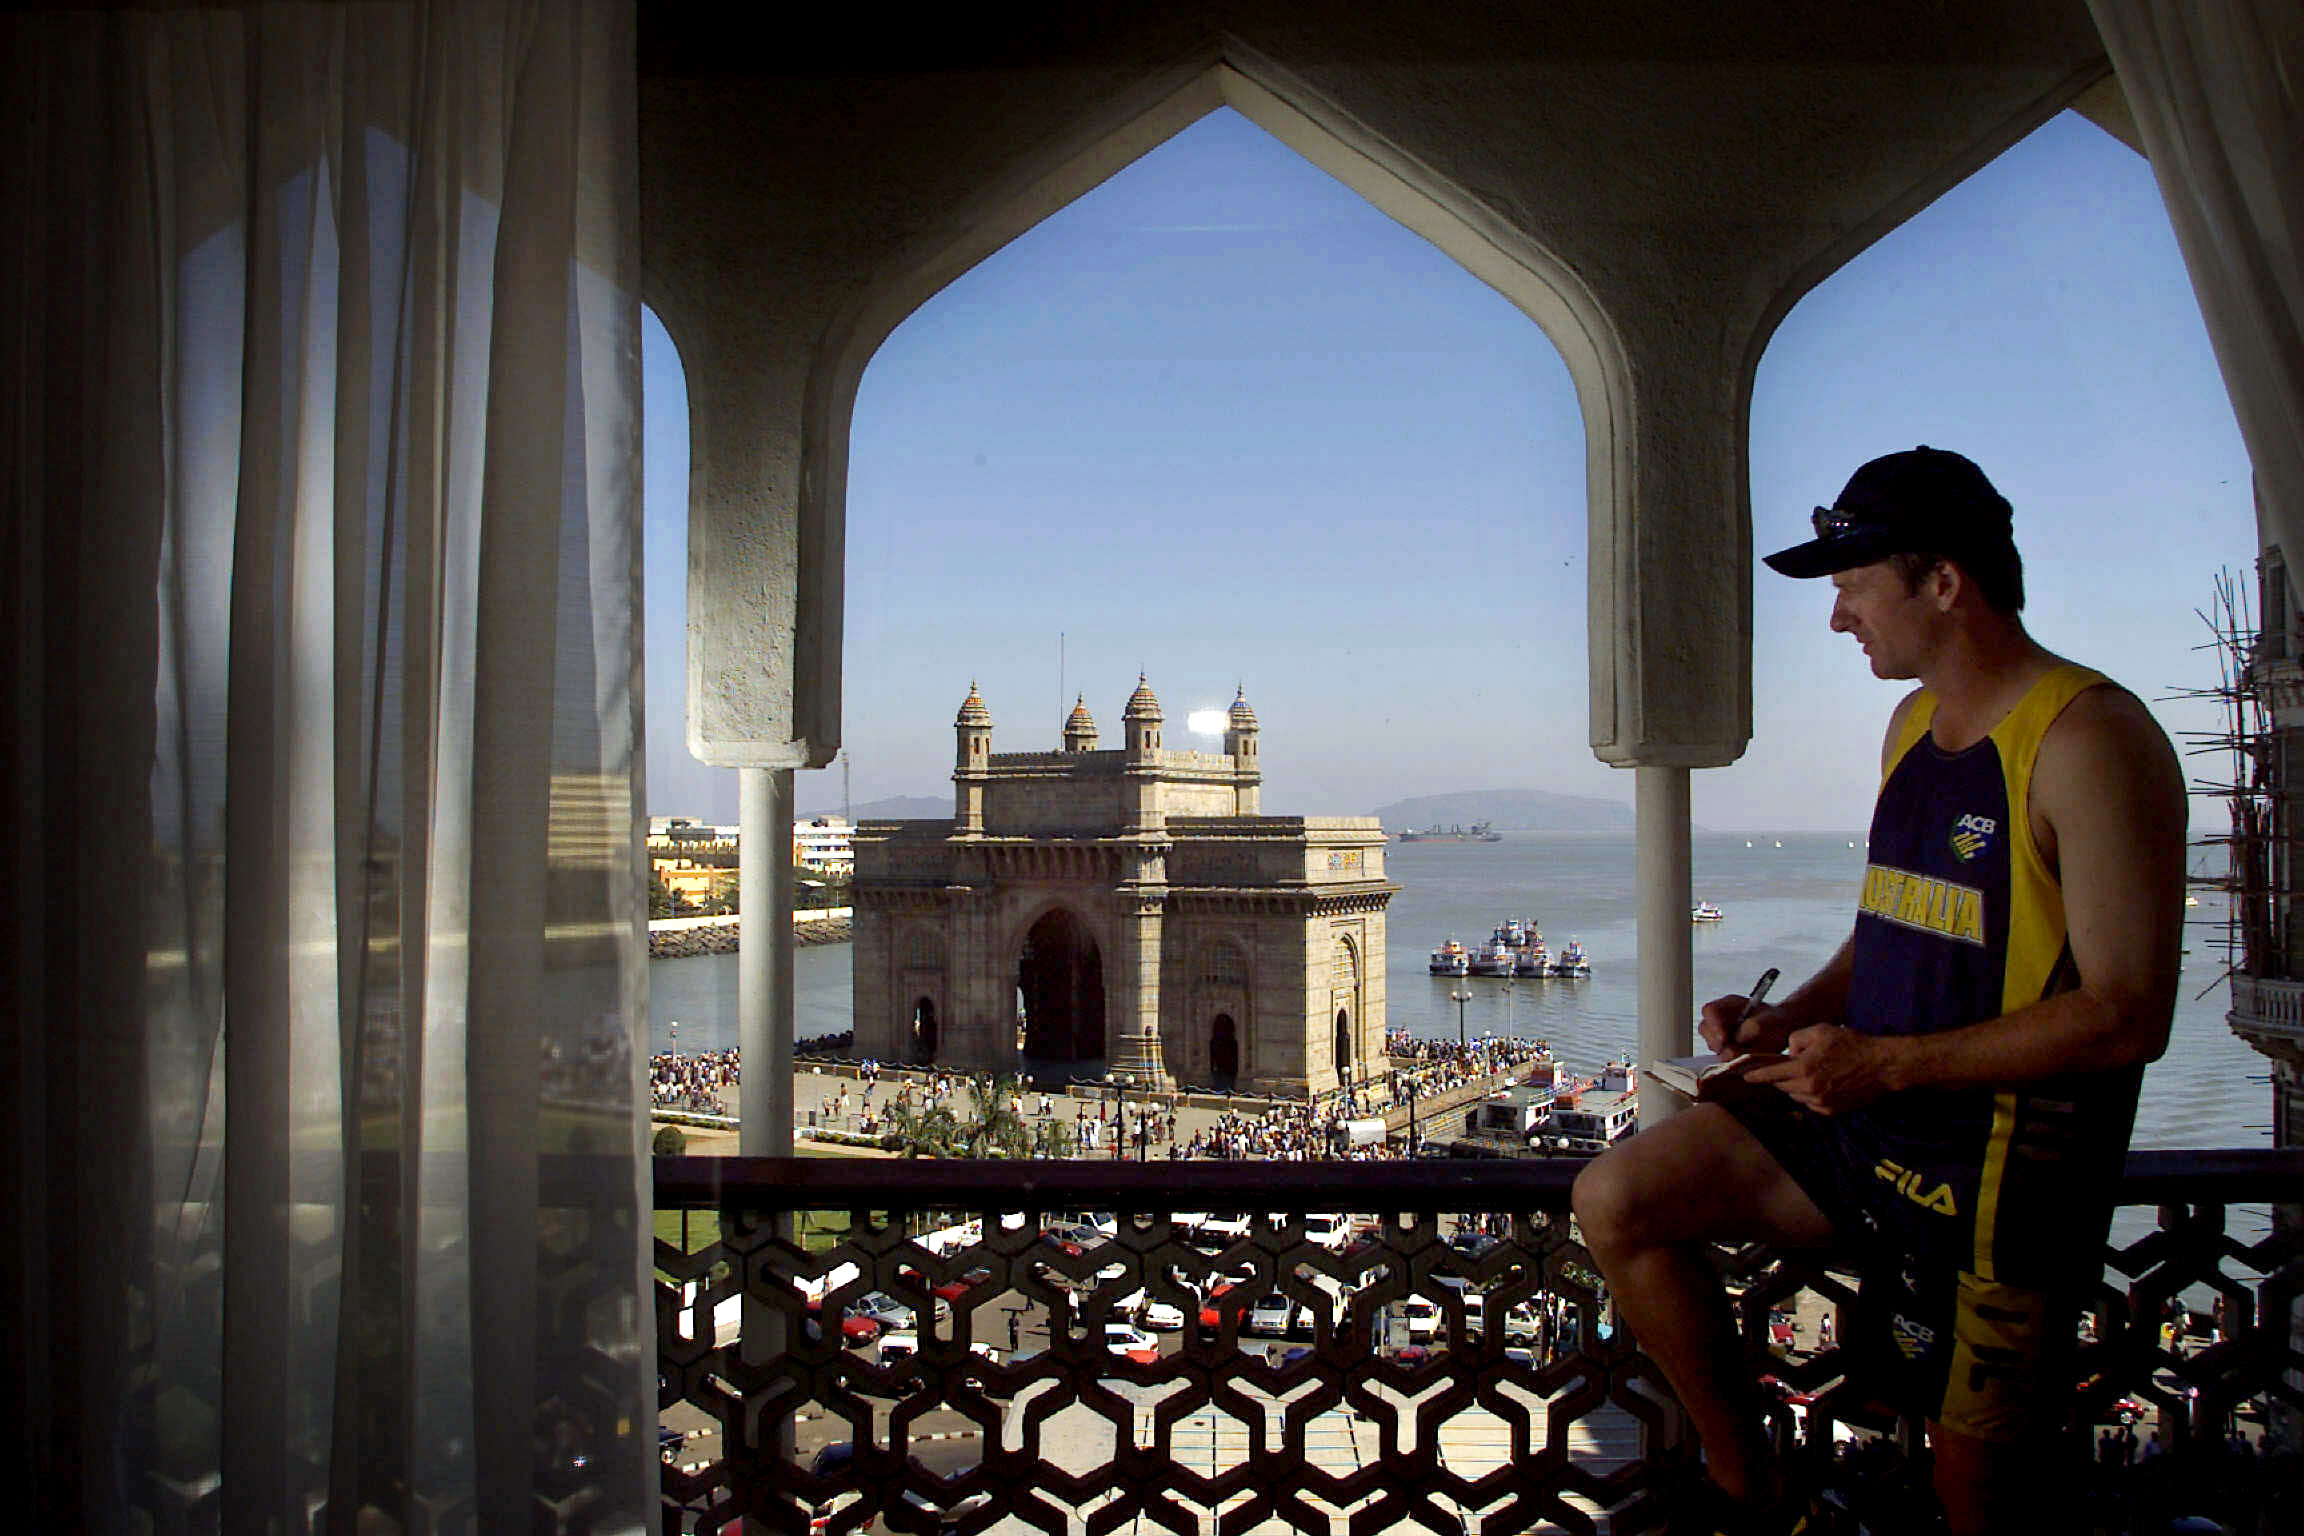   Aust cricketer Steve Waugh admiring the view from his room in the Taj Mahal Hotel in Bombay, India during cricket tour 26 Feb 2001.  